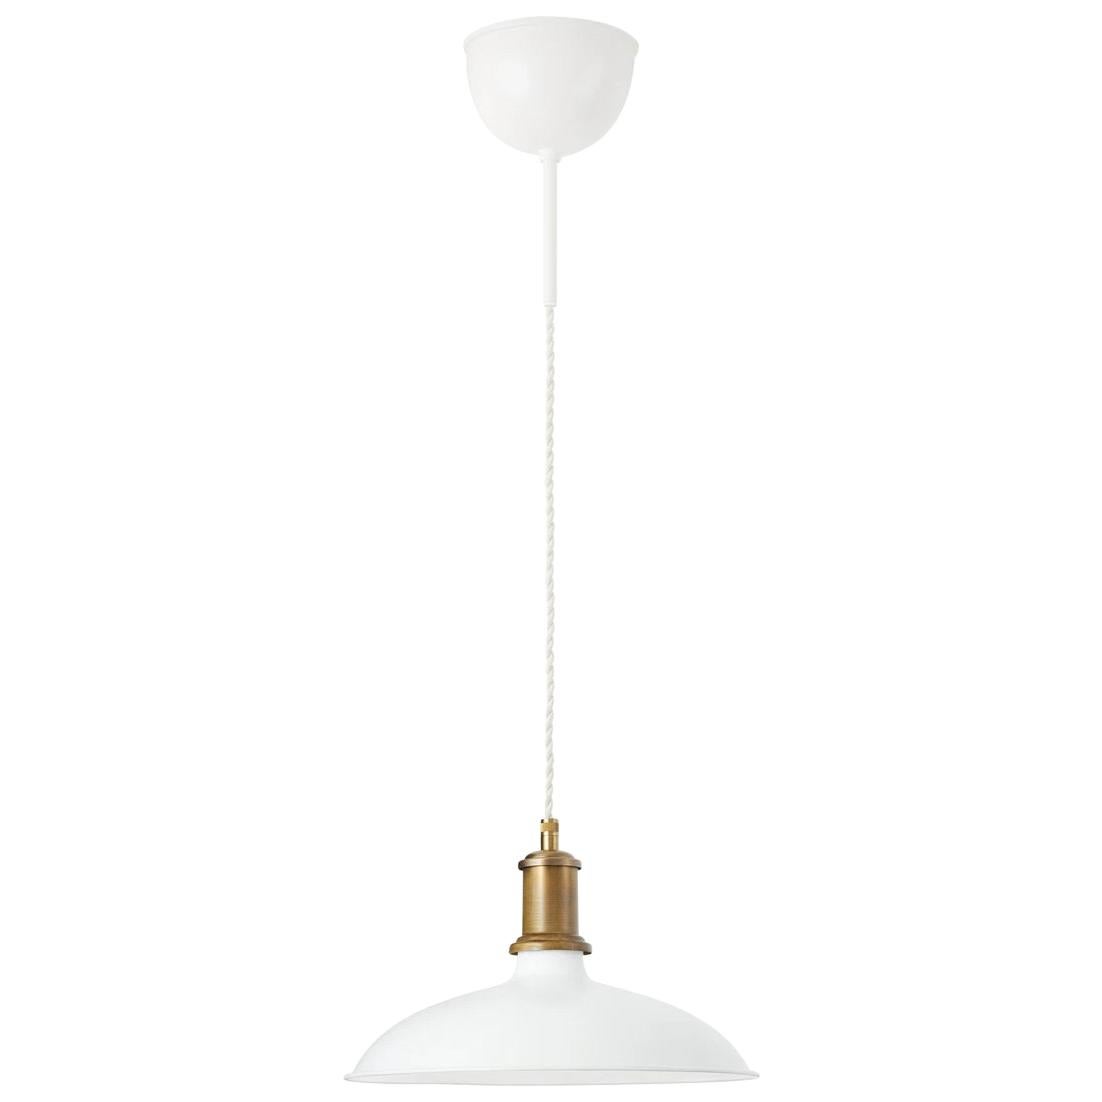 Sabina Grubbeson Small Kavaljer White Ceiling Lamp by Konsthantverk For Sale